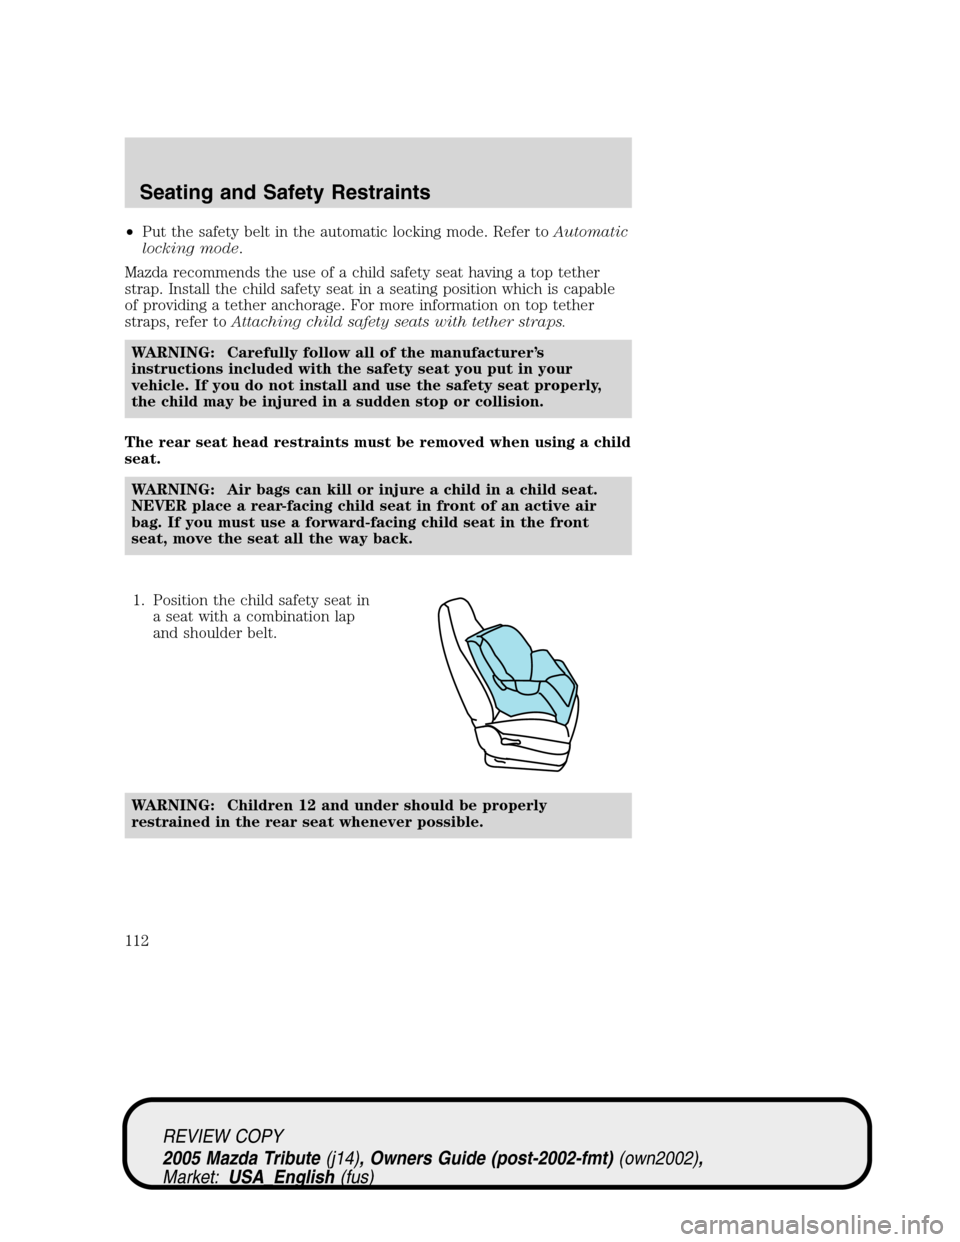 MAZDA MODEL TRIBUTE 2005  Owners Manual (in English) •Put the safety belt in the automatic locking mode. Refer toAutomatic
locking mode.
Mazda recommends the use of a child safety seat having a top tether
strap. Install the child safety seat in a seat